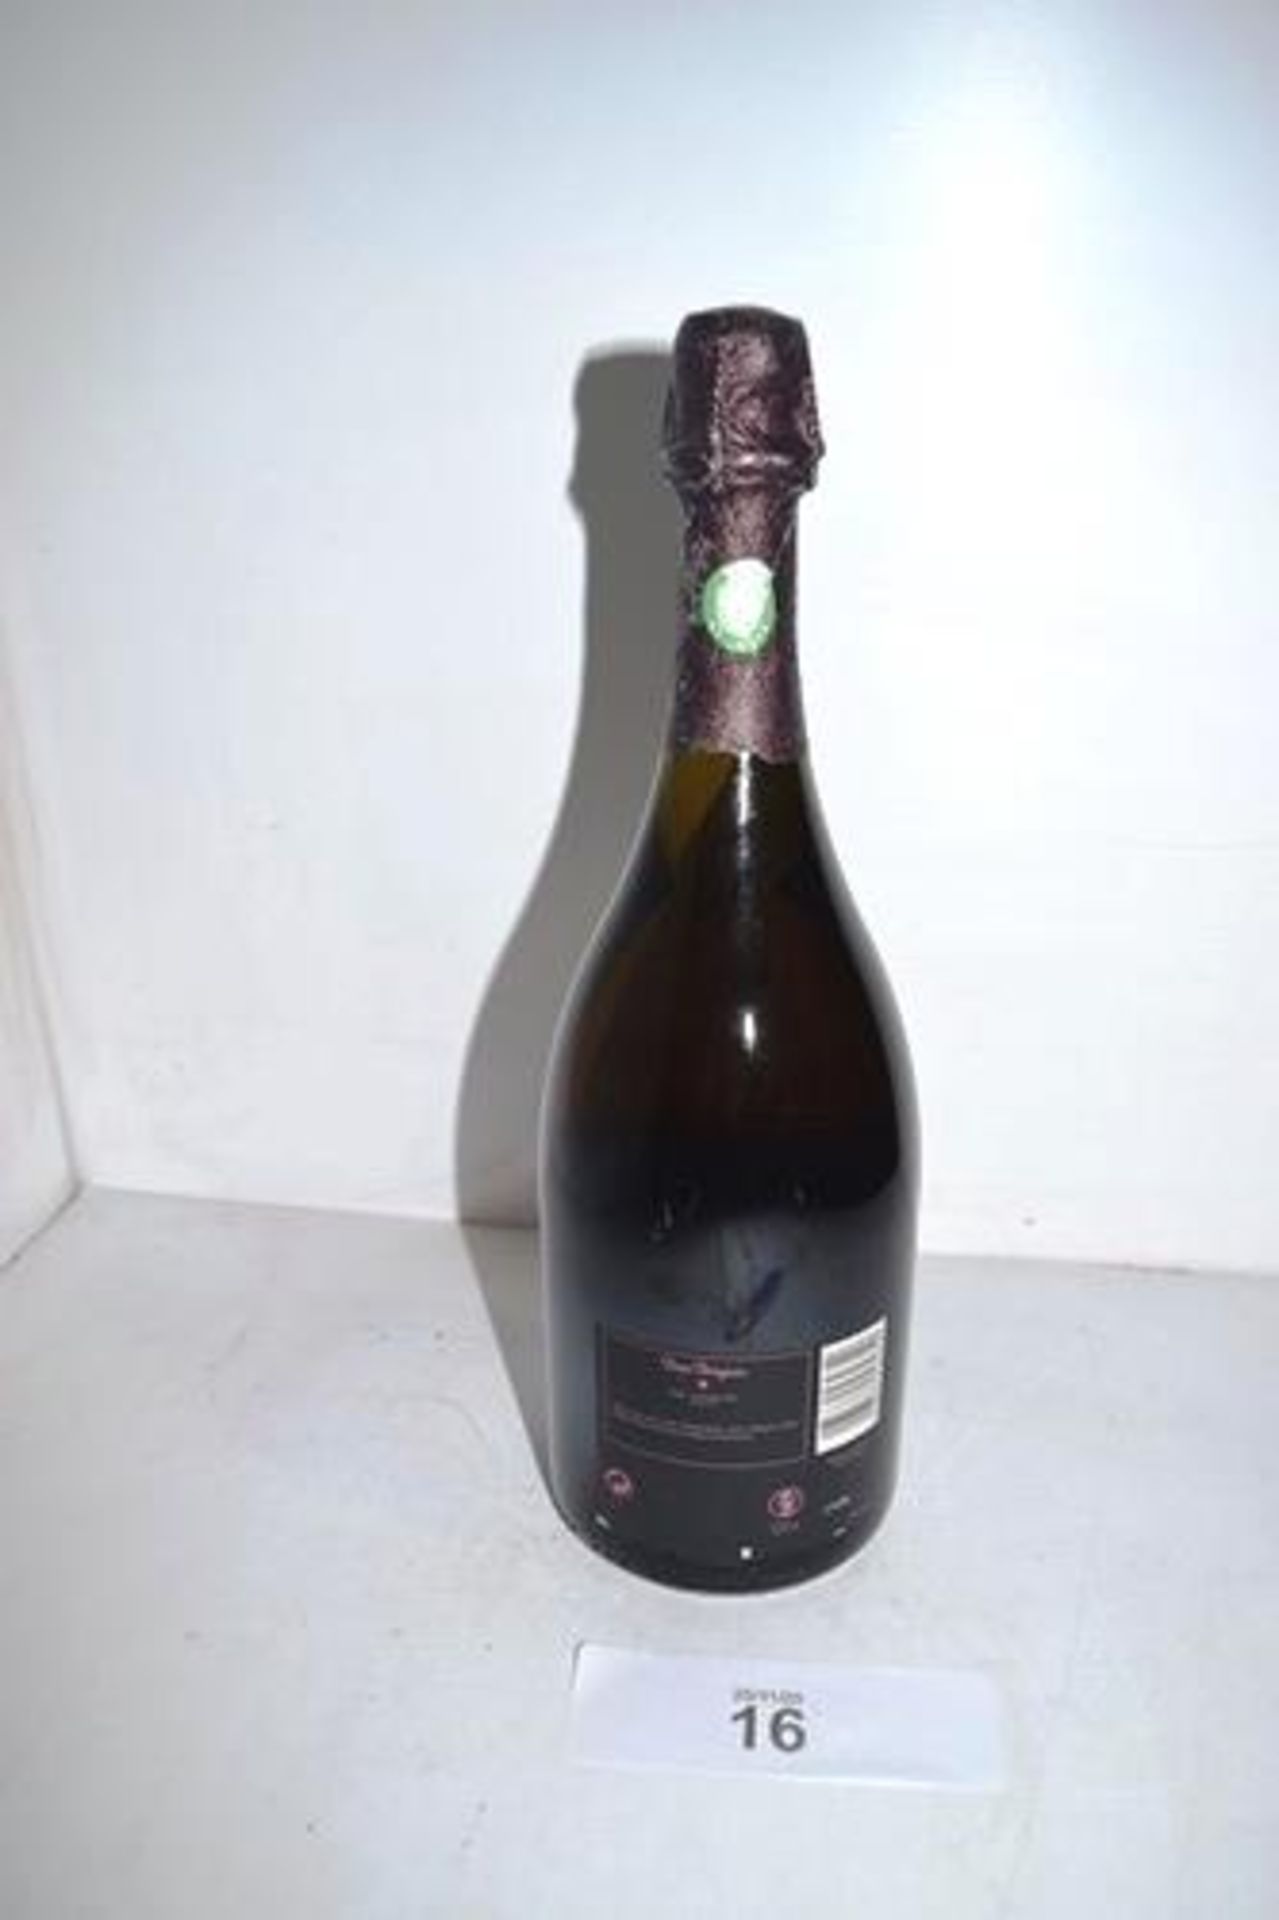 1 x 750ml bottle of Dom Perignon Rose Vintage 2004 champagne - Unboxed (1) (Cab1) - Image 2 of 2